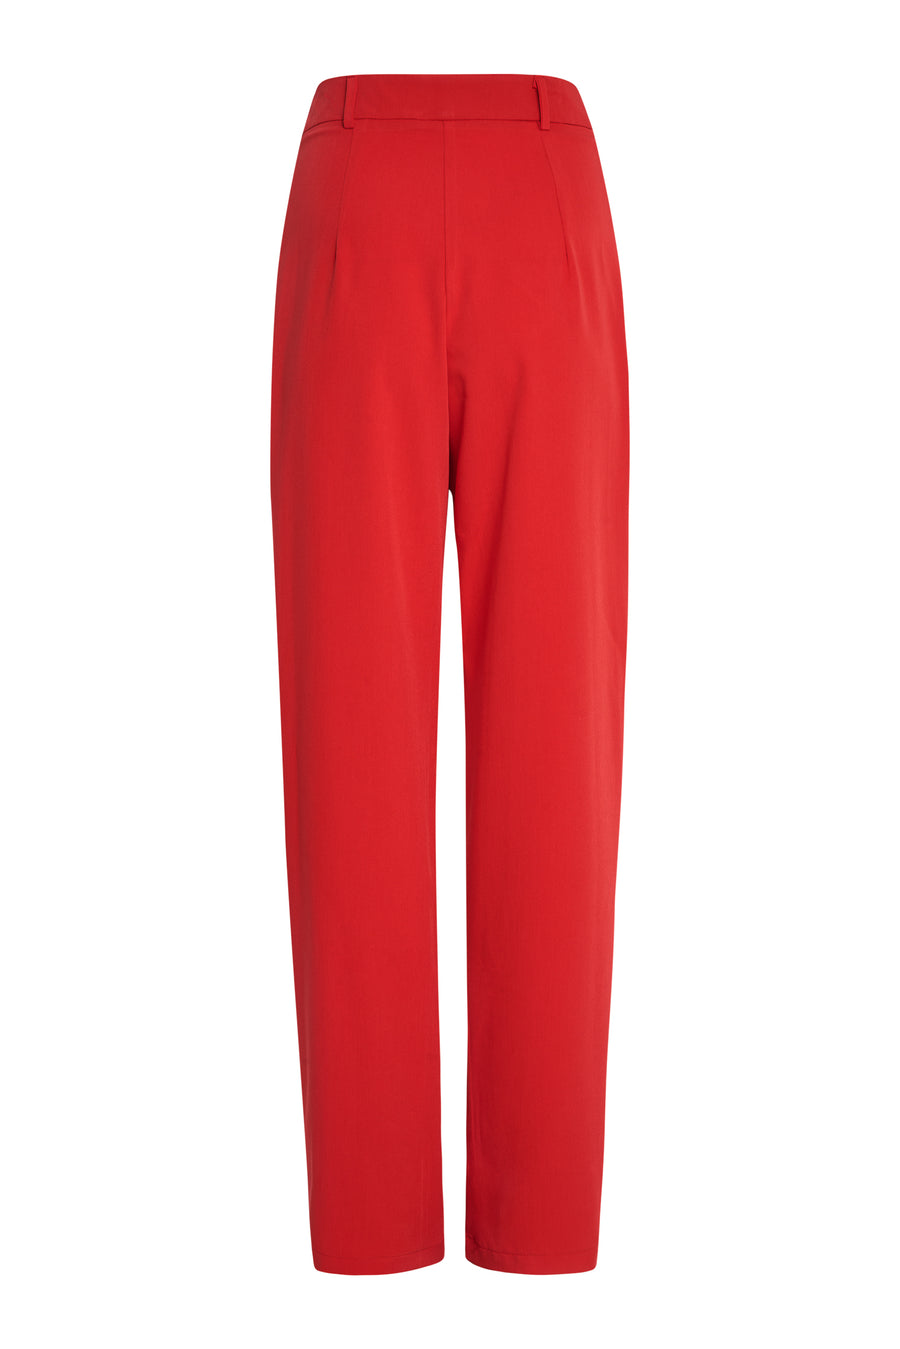 Janet Pants (Red)